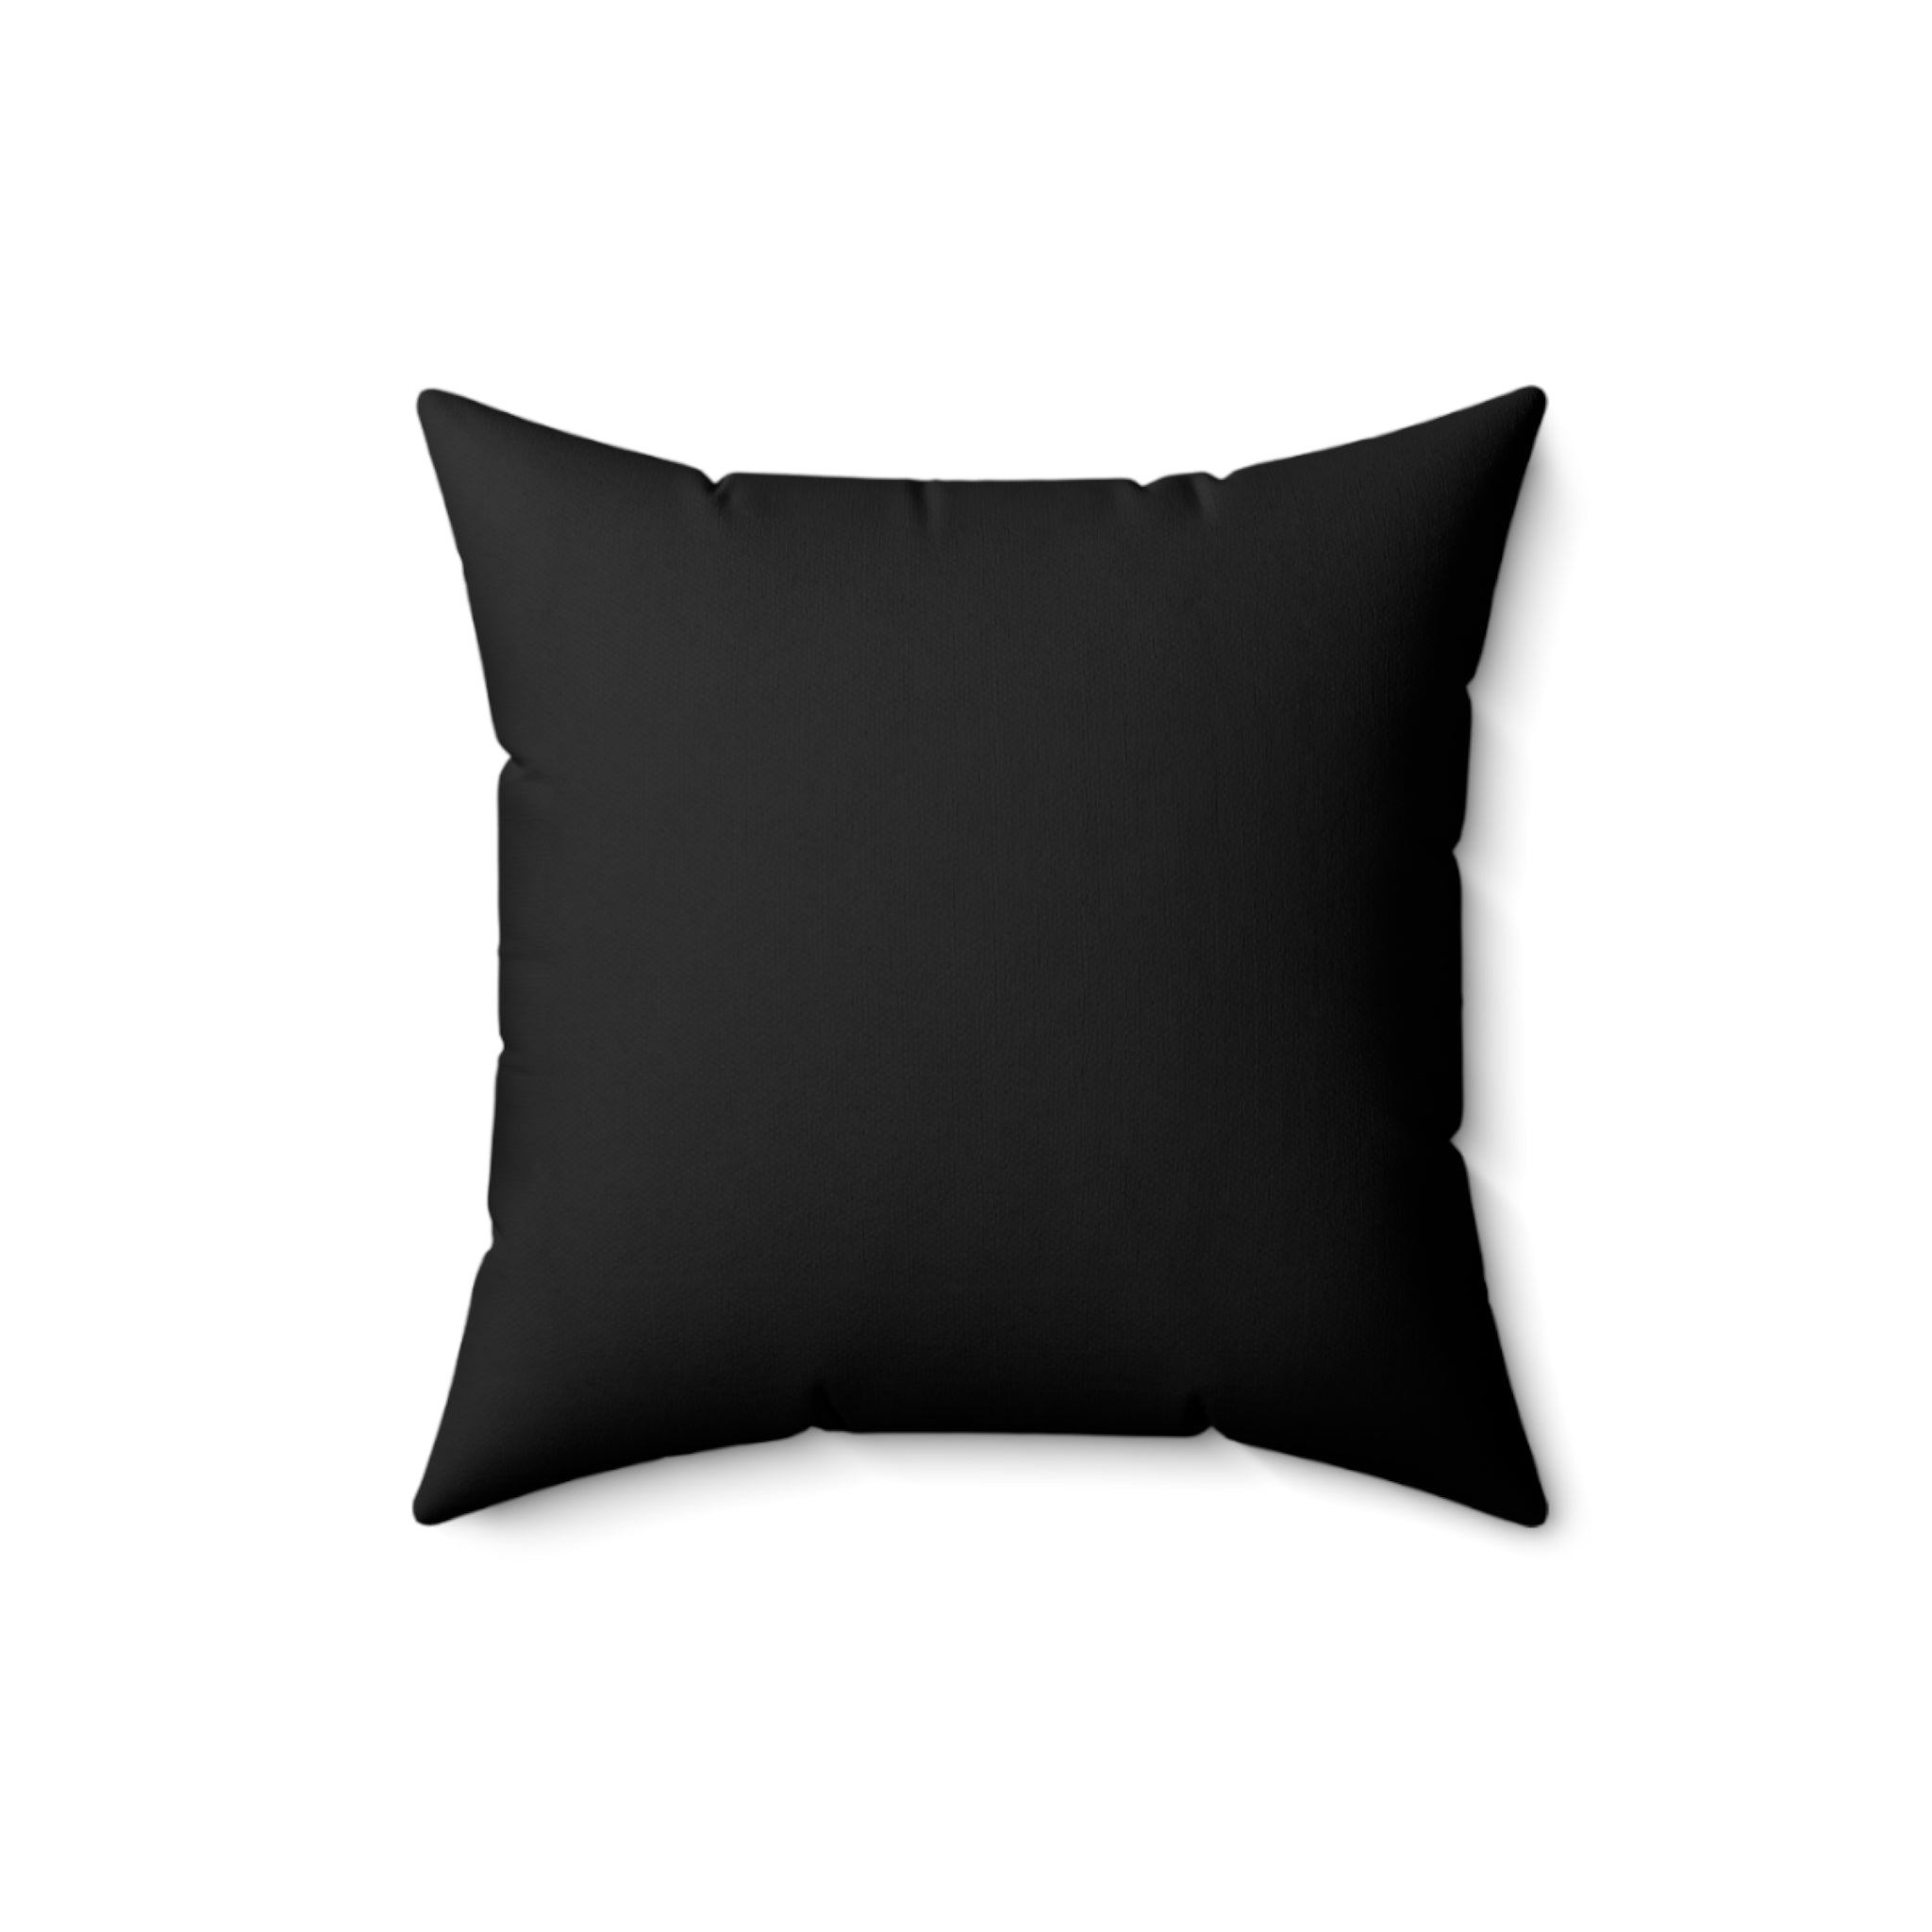 Sinister Stripes Faux Suede Pillow: Purple and Black Striped